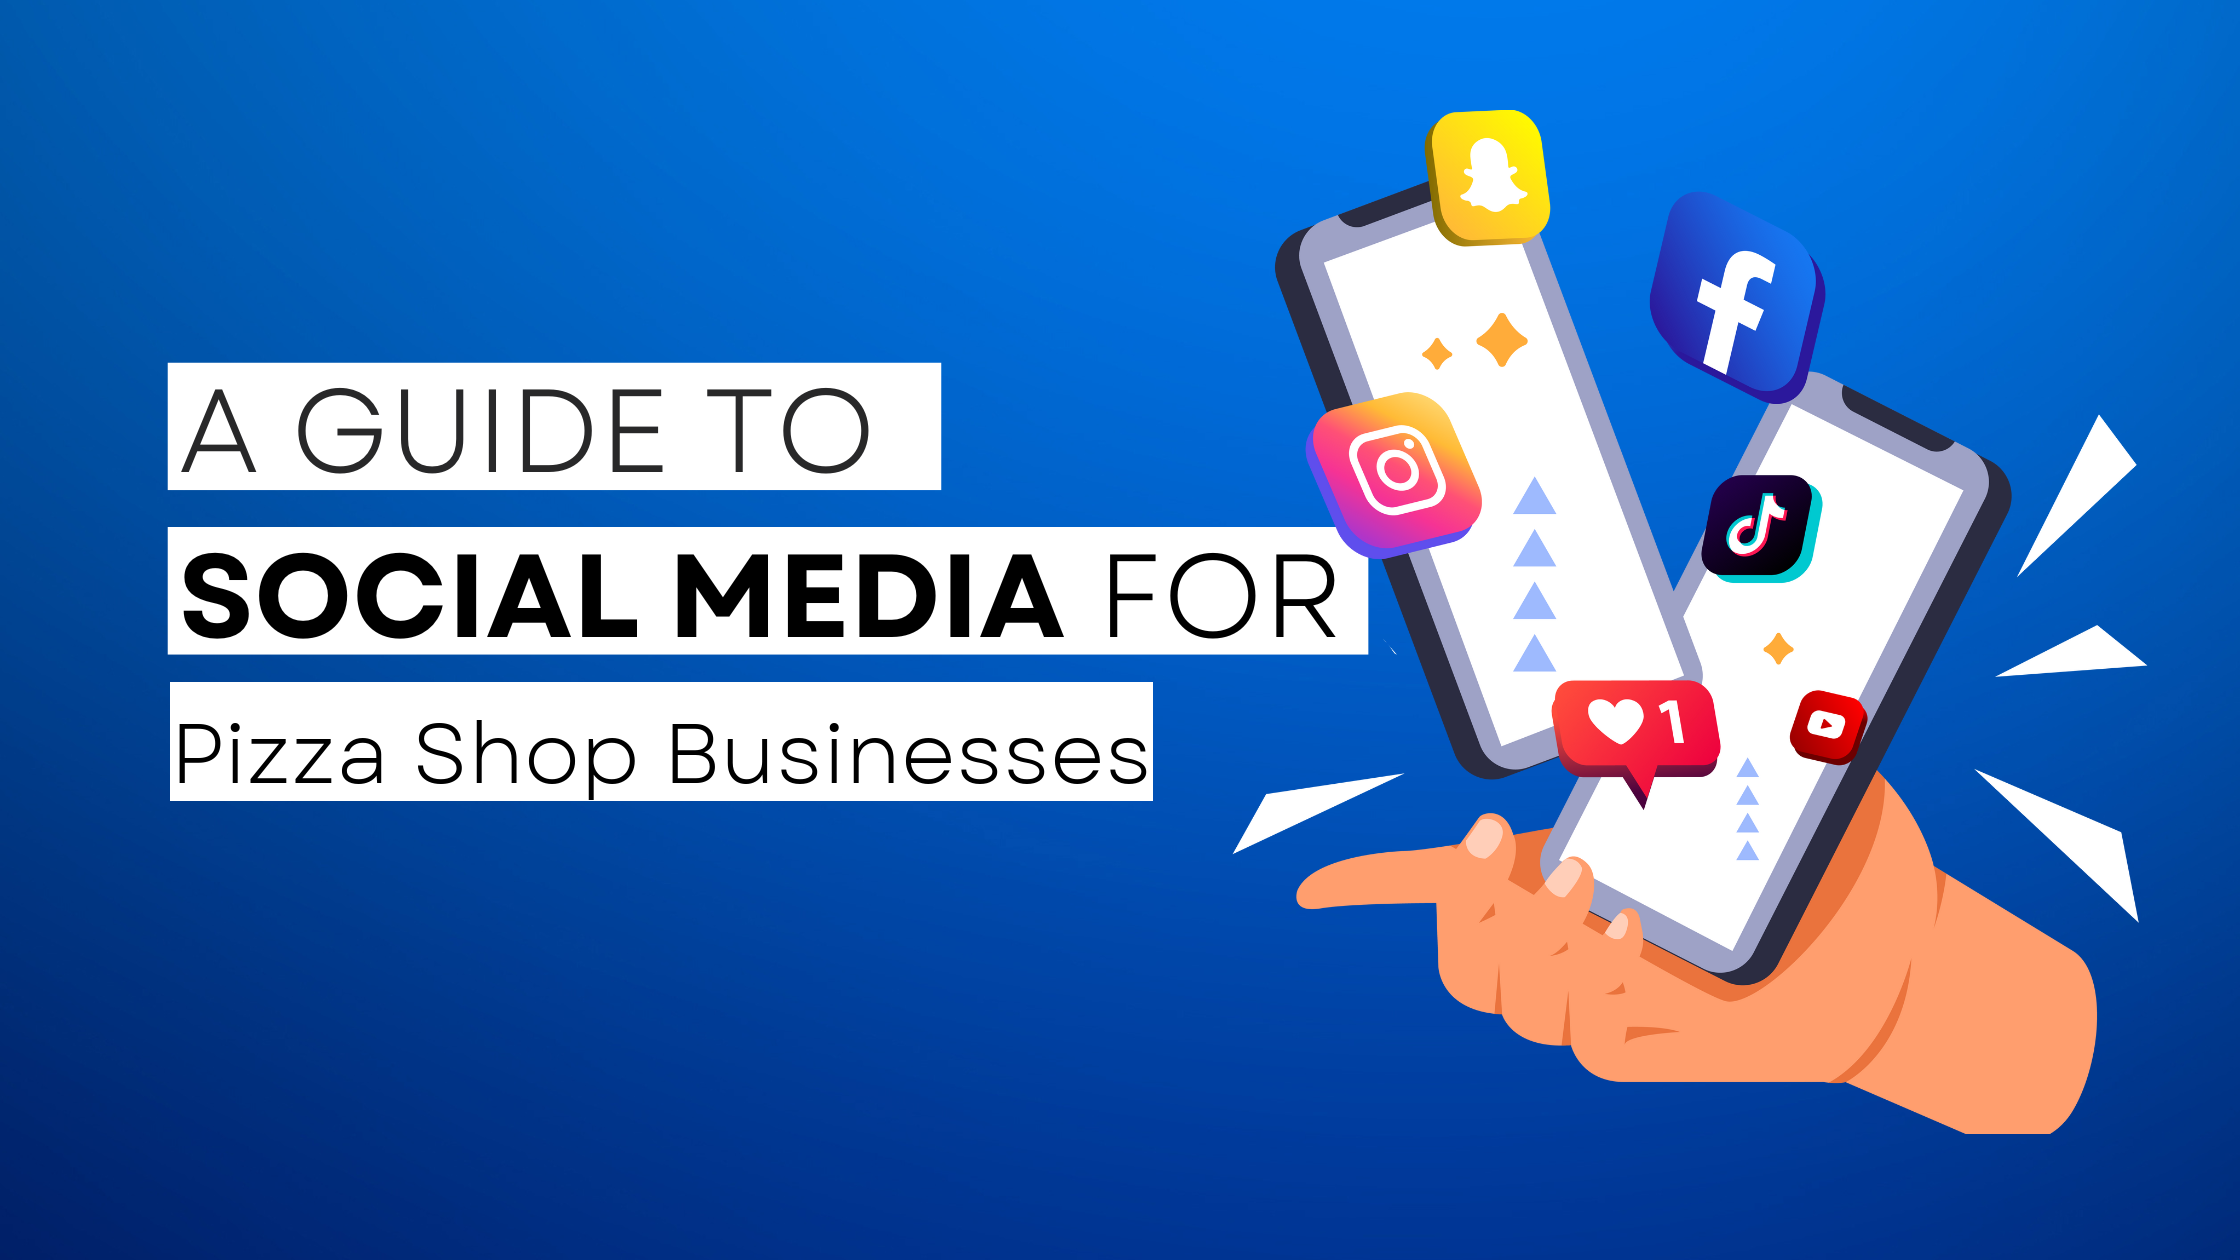 How to start Pizza Shop on social media